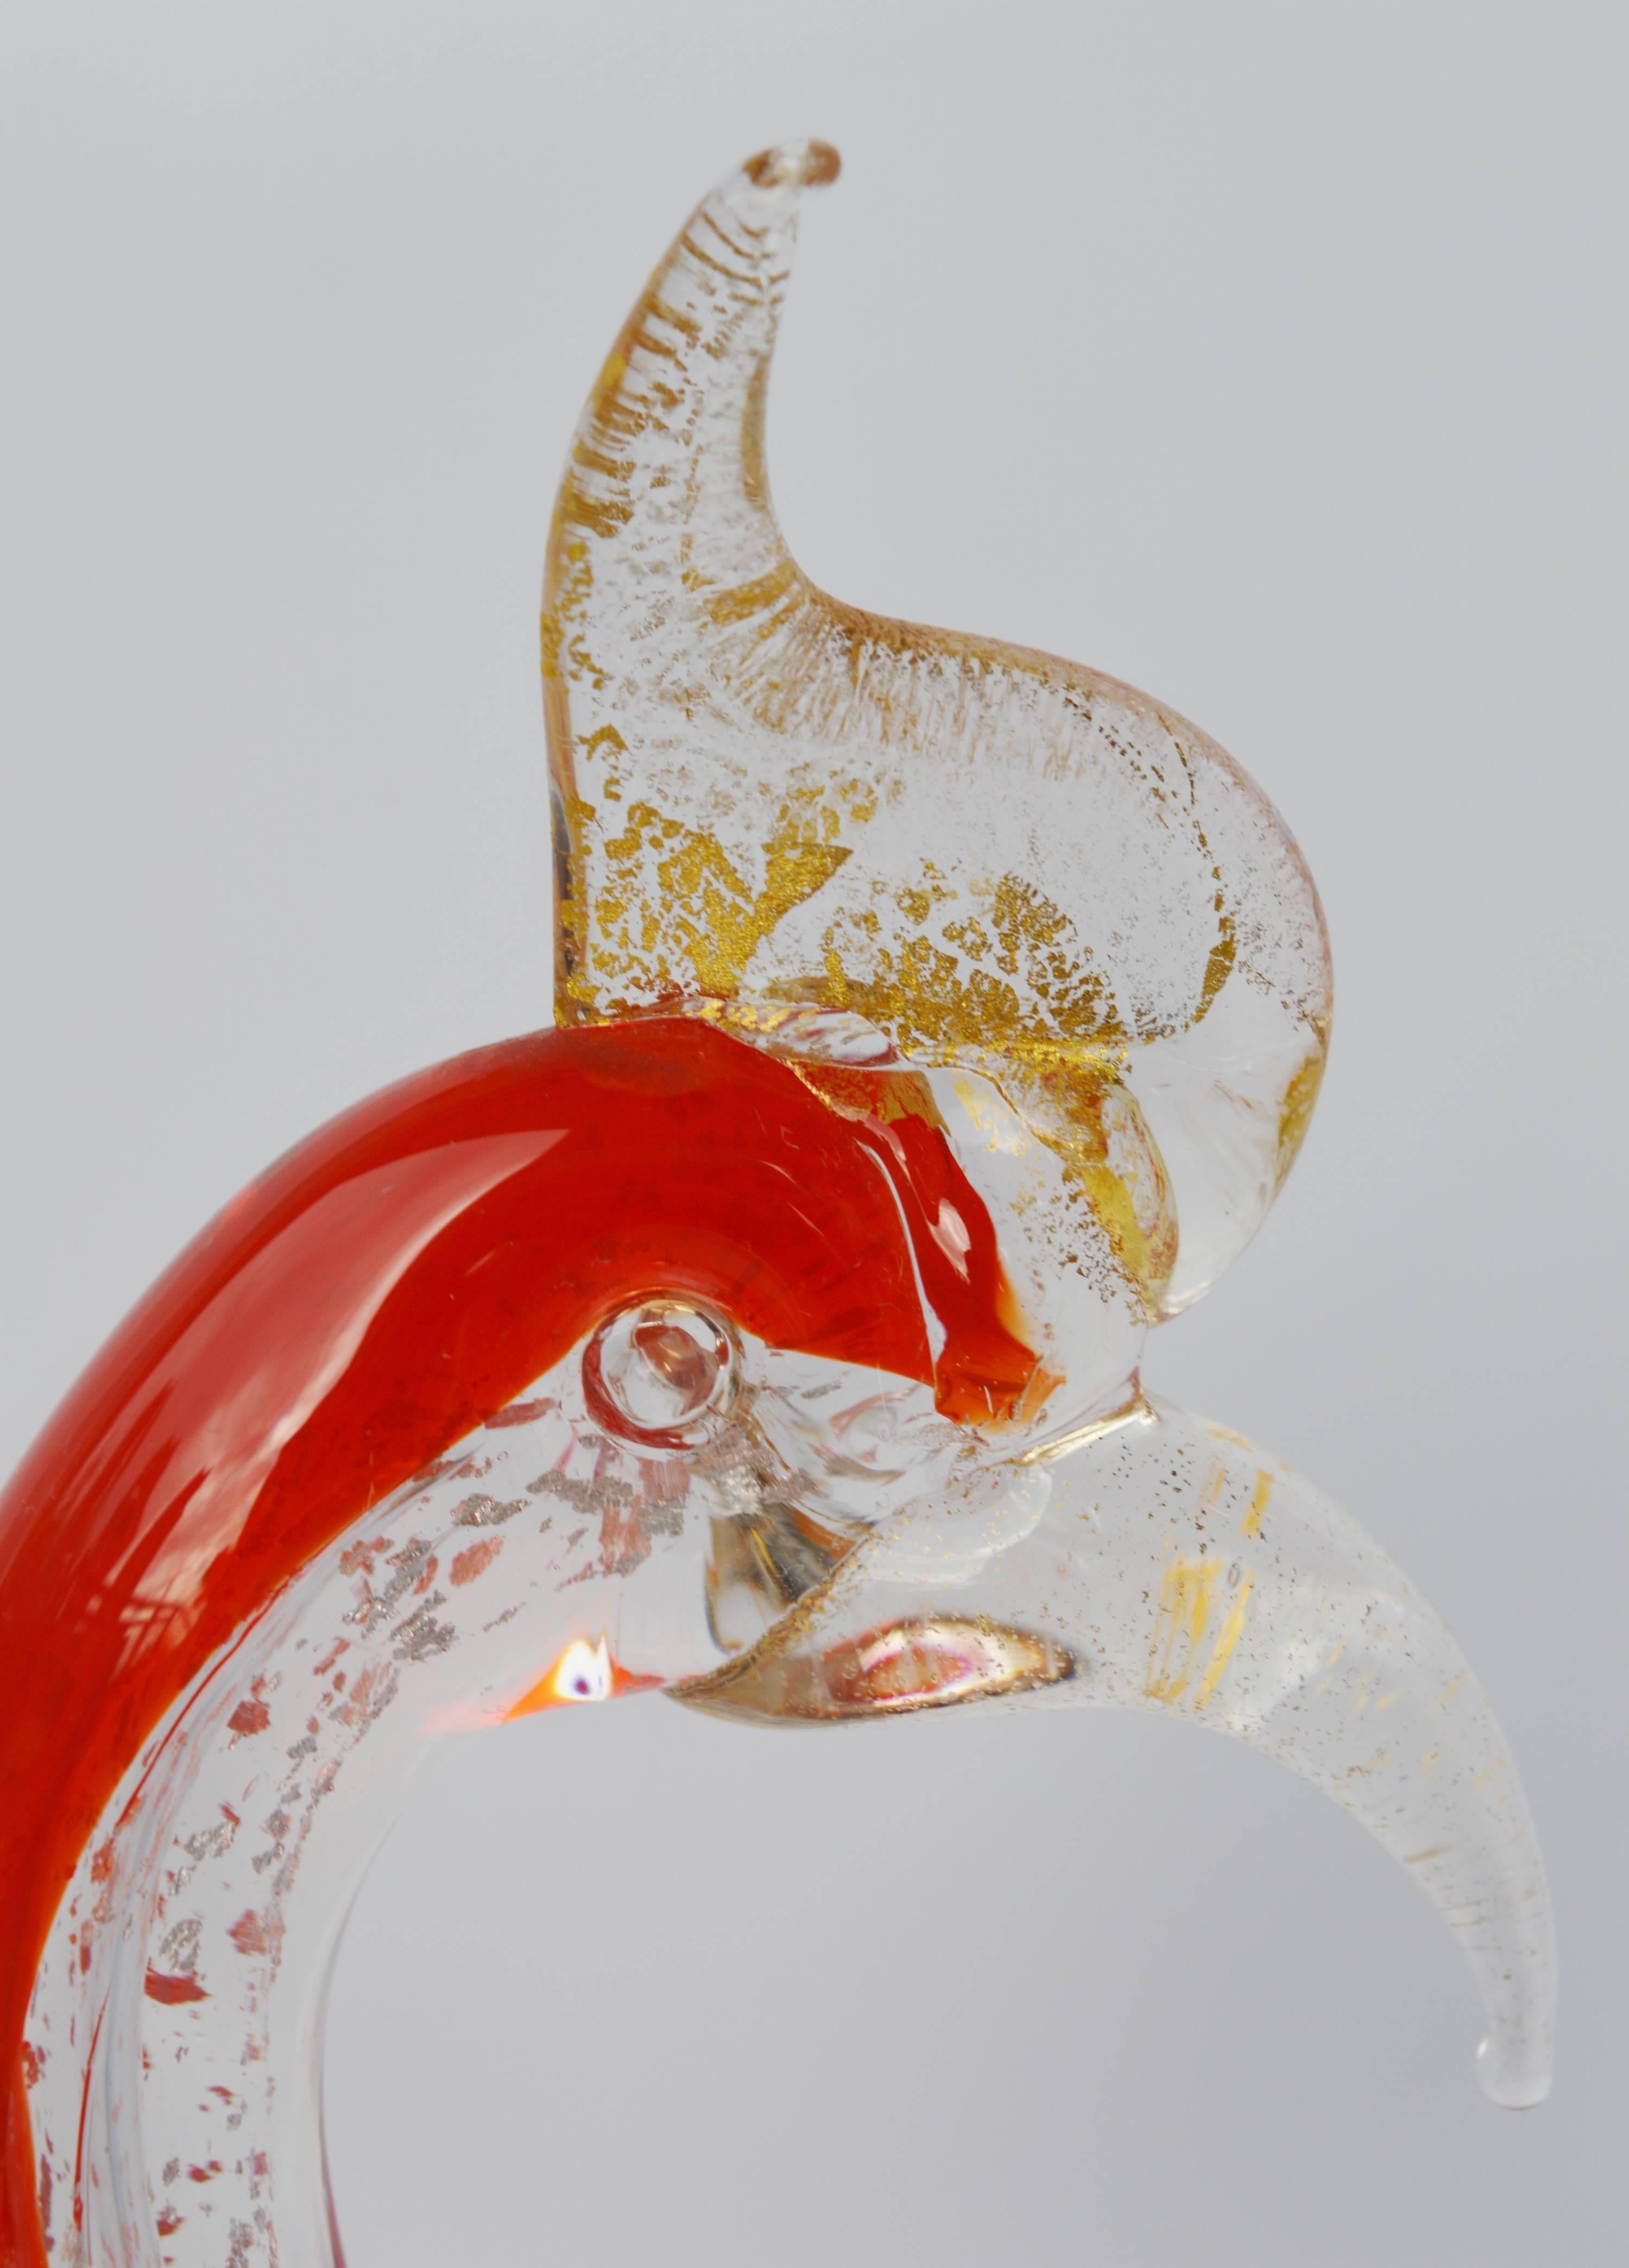 This dramatic and spirited handblown Mid-Century rooster figurine is delightful! The transparent sections of clear glass speckled with gold flecks, combined with the solid red on the back, gives it a Minimalist and airy feel. The character of the